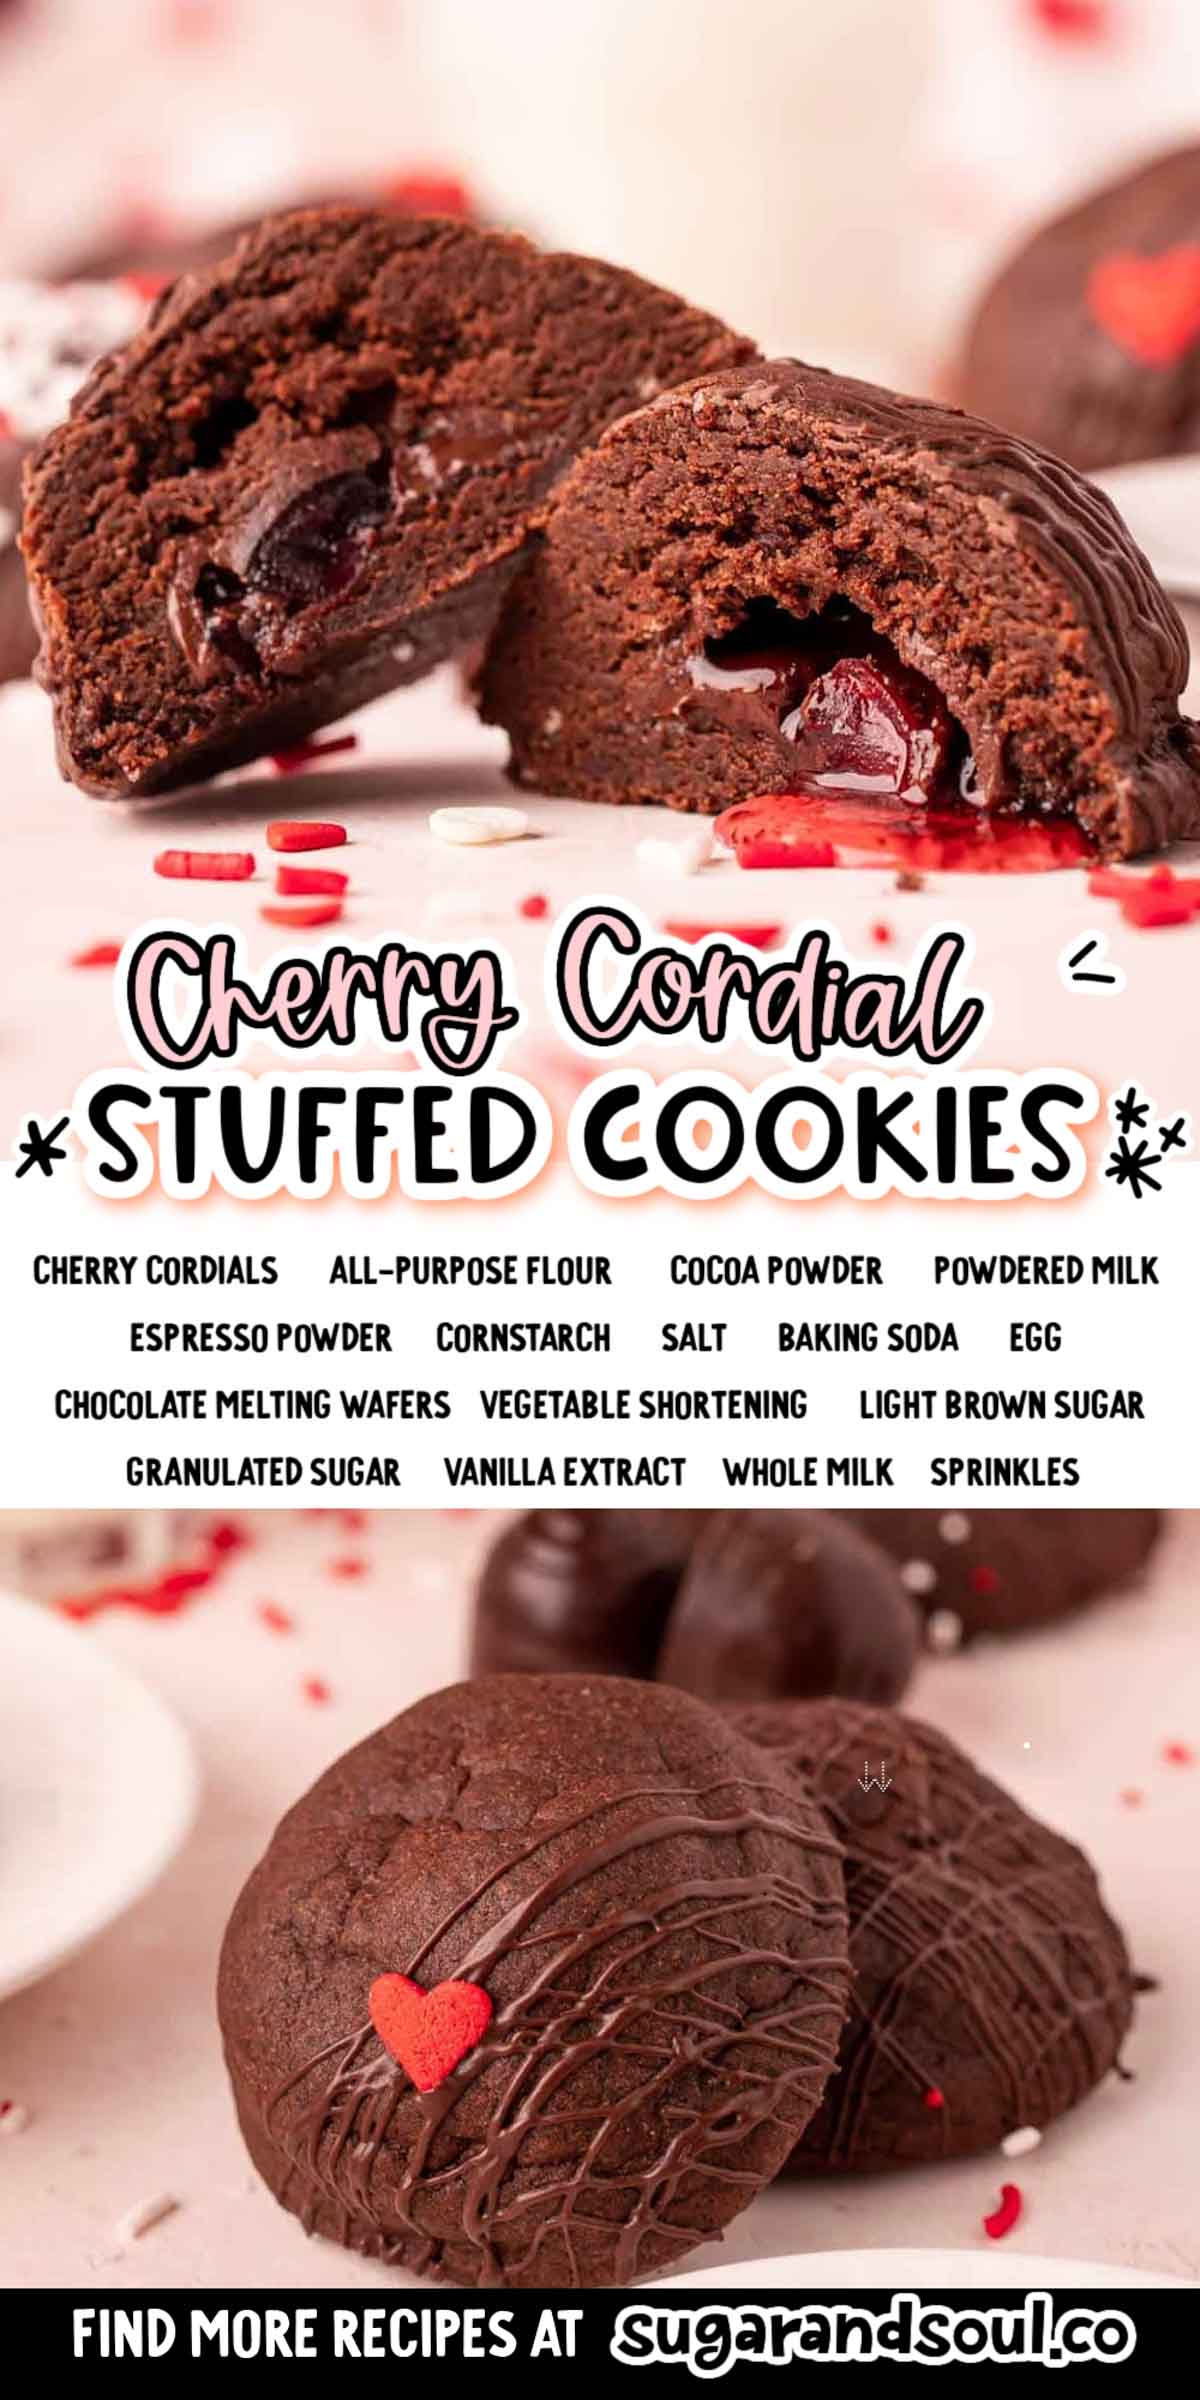 Chocolate Cherry Cordial Cookies are a delicious, fun Valentine's Day treat that wraps homemade chocolate cookie dough around cordial cherries! Ready in under an hour using mostly pantry staple ingredients!  via @sugarandsoulco